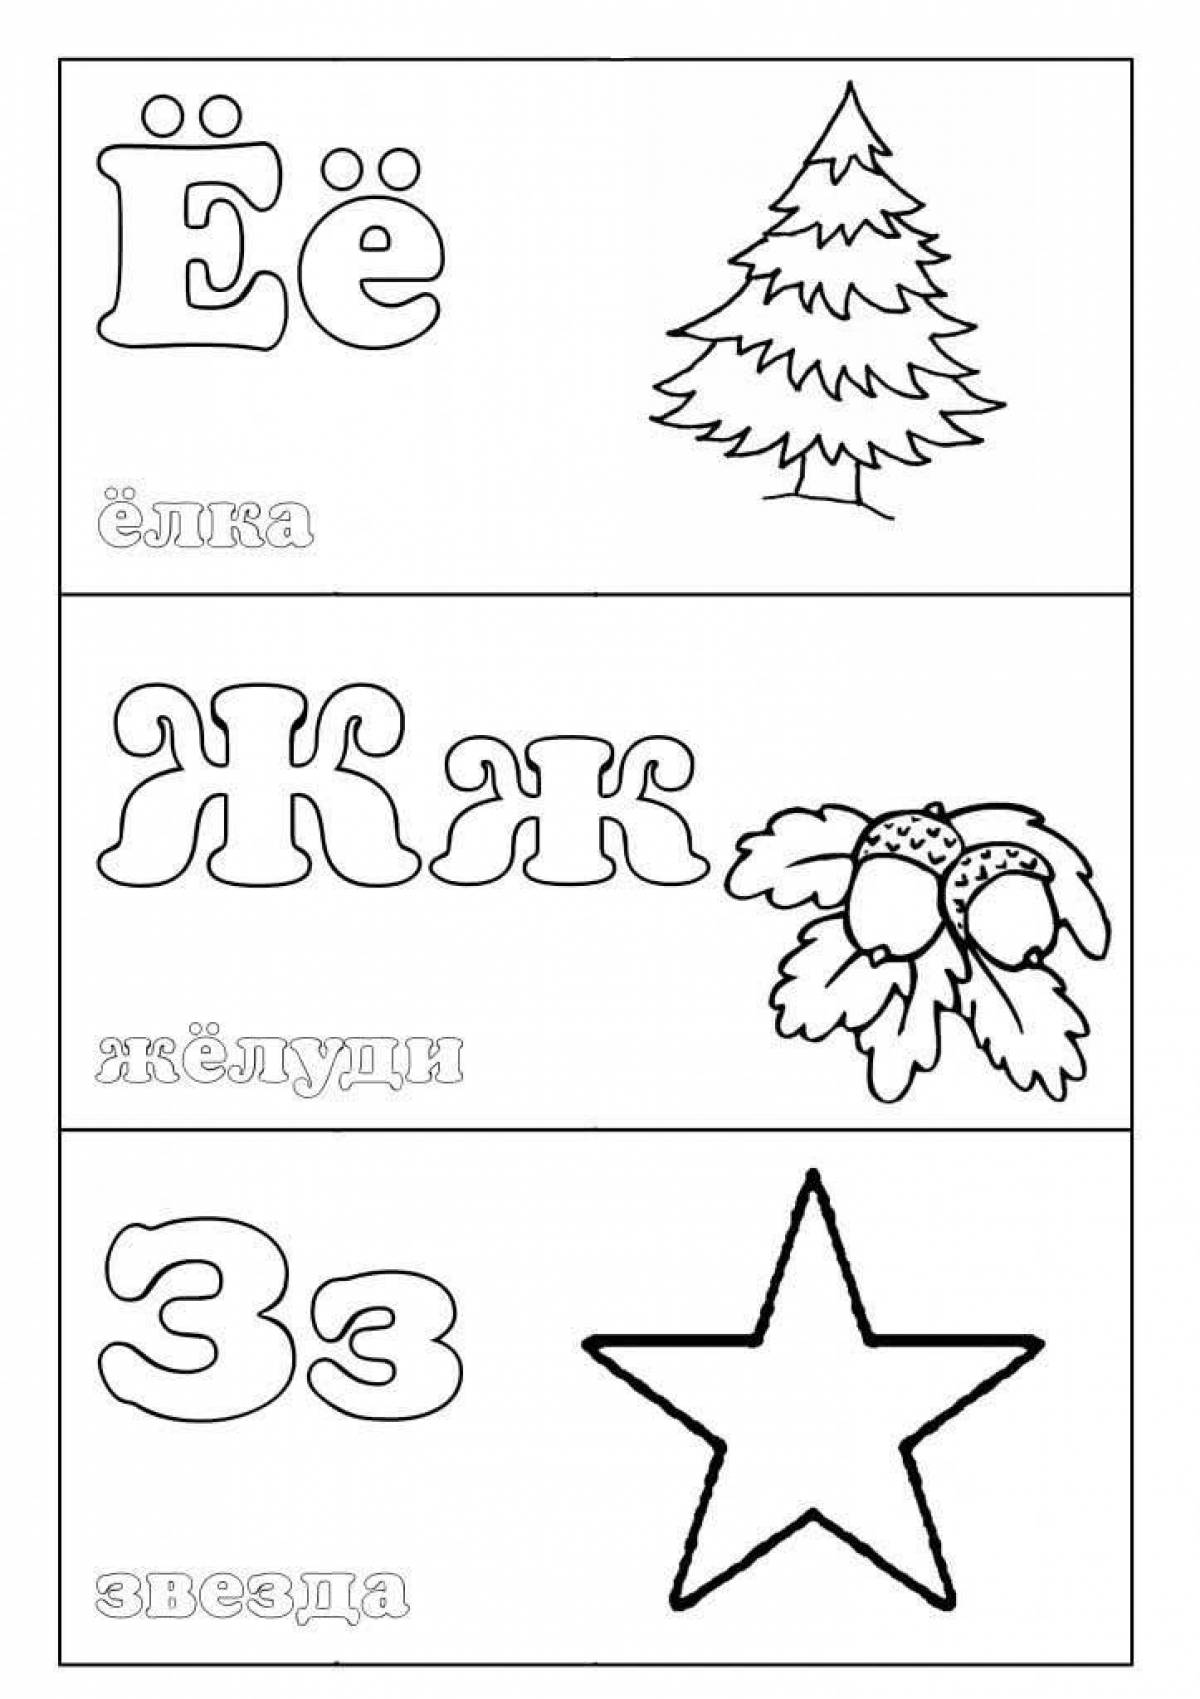 Vibrant alphabet coloring page with pictures